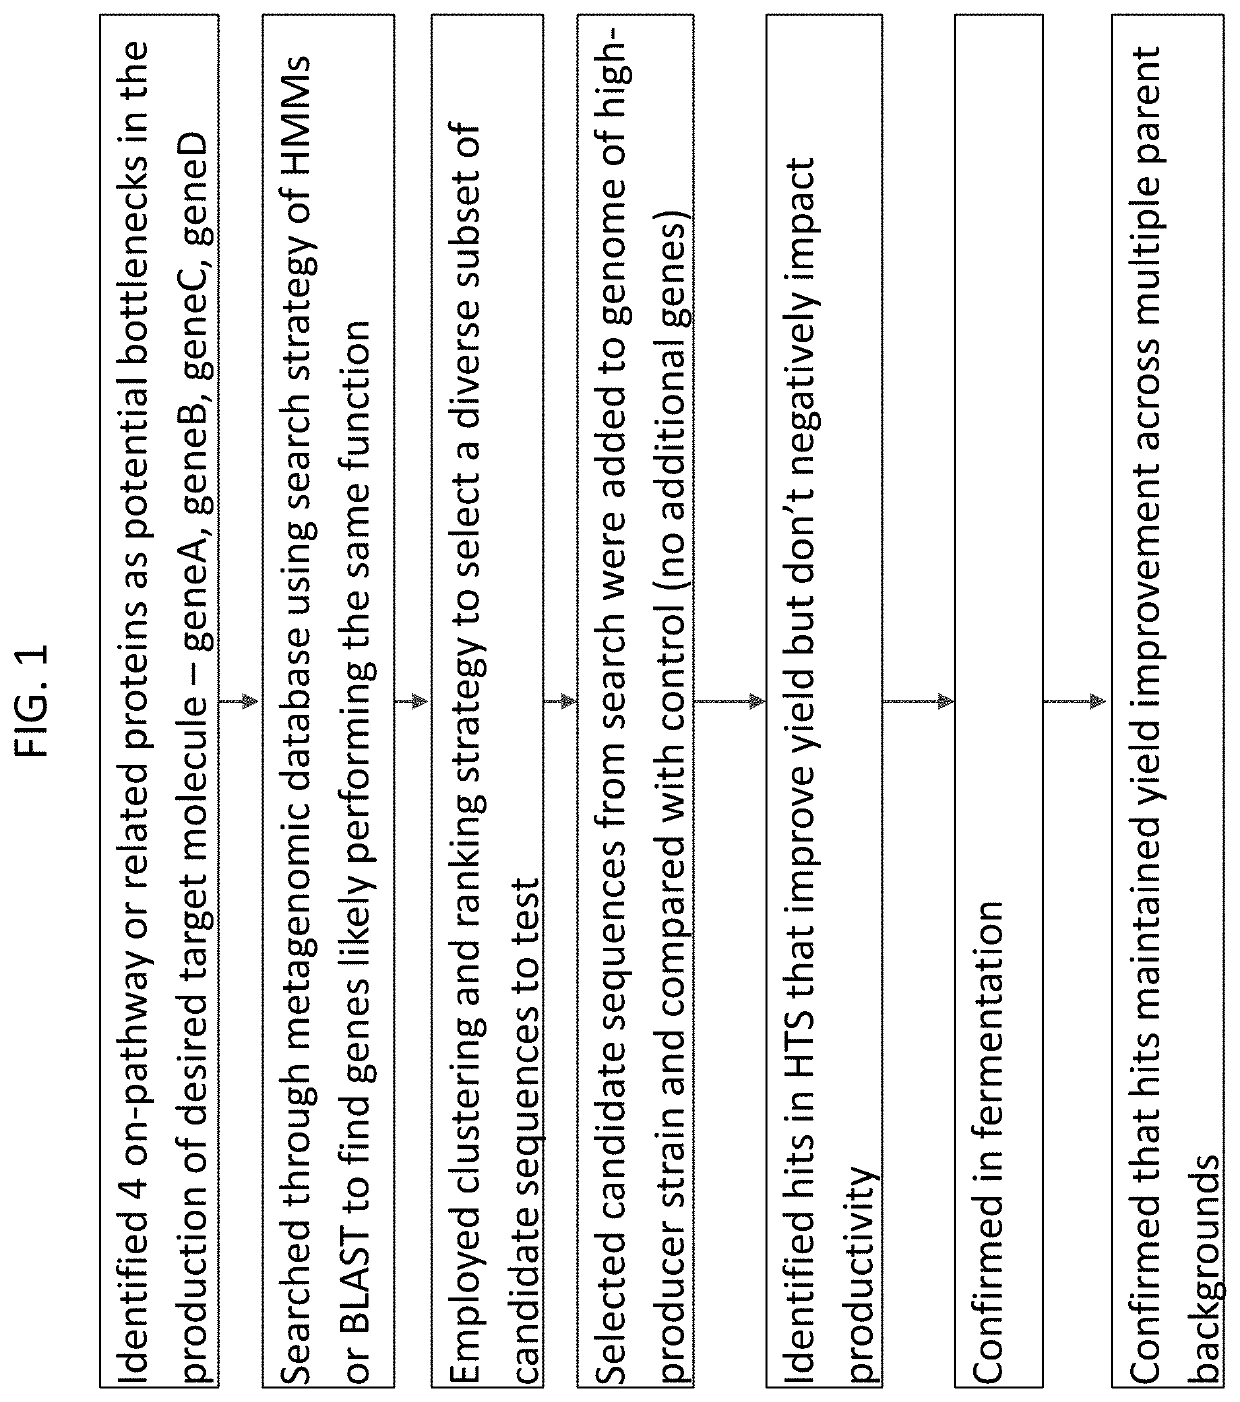 Methods and systems for the optimization of a biosynthetic pathway